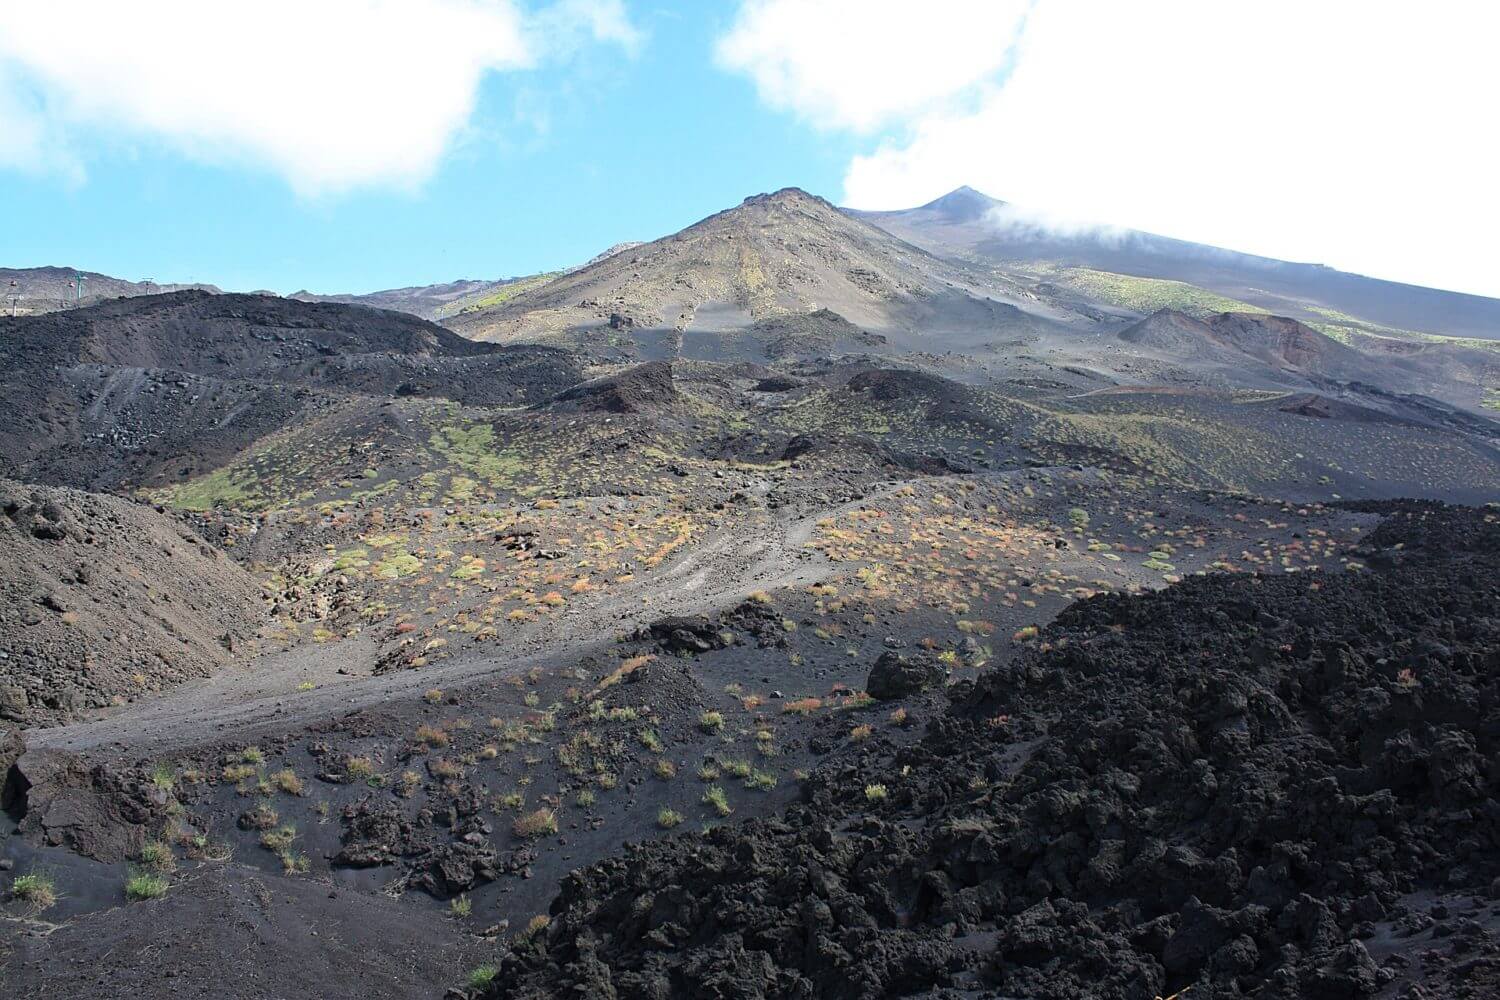 Mount Etna - Image by Anna Sulencka from Pixabay